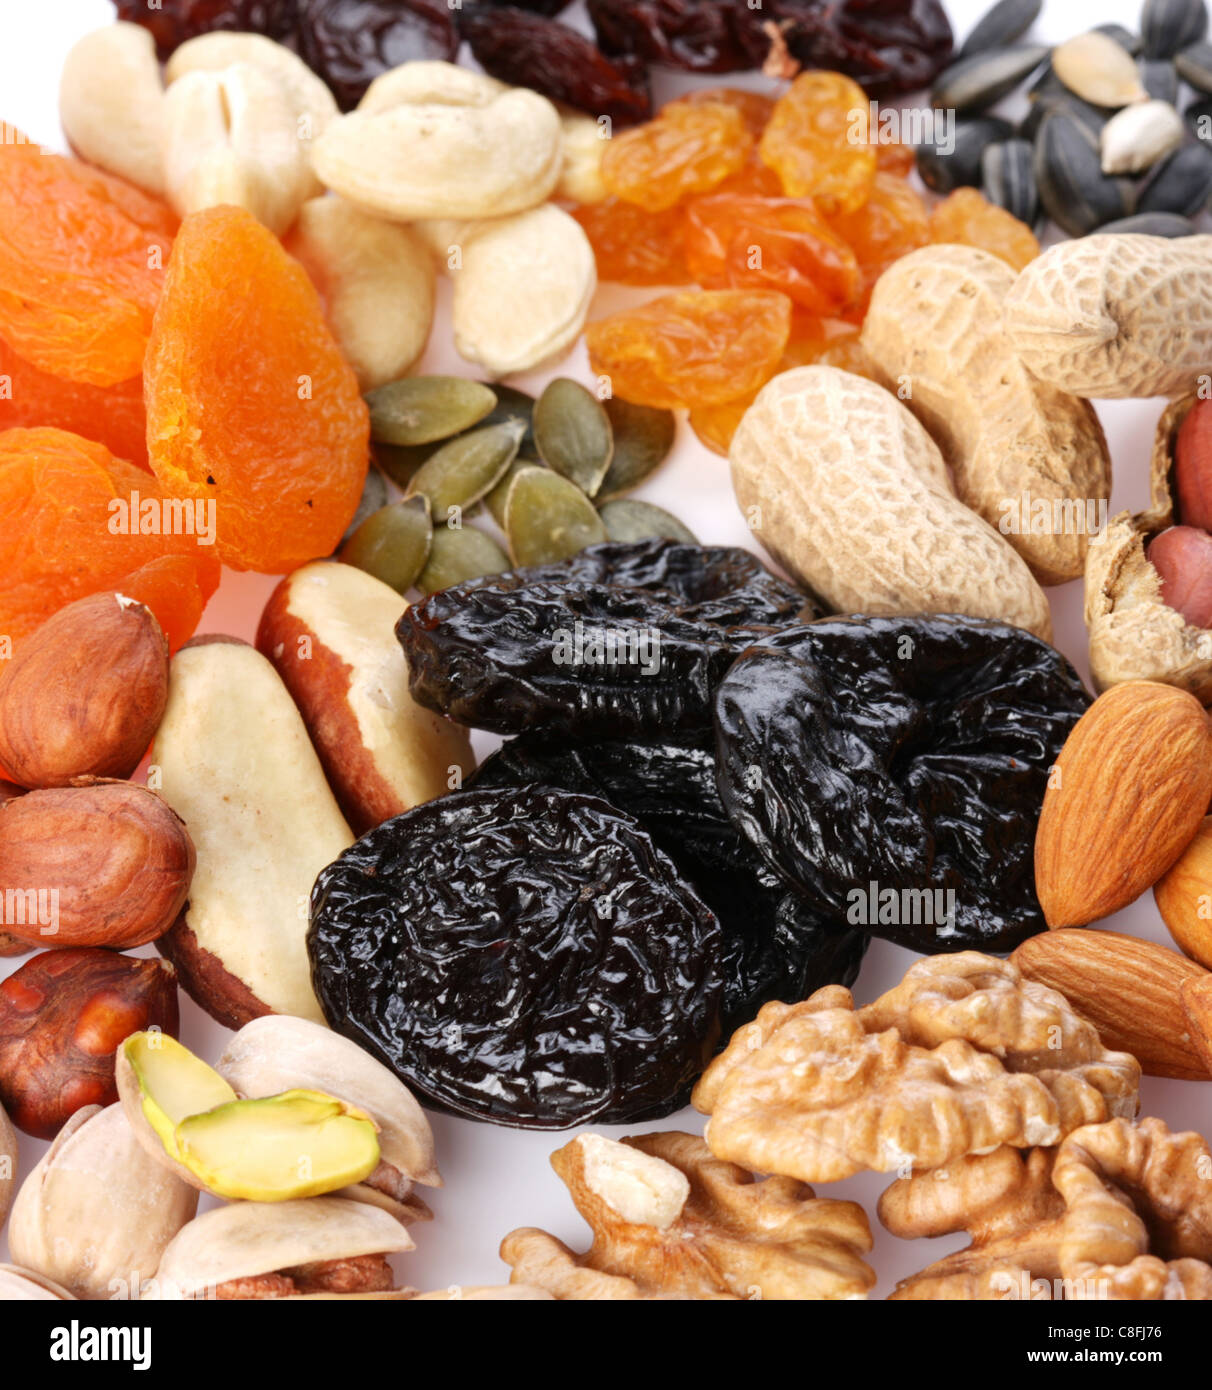 Group of different dried fruits and nuts on a white background. Stock Photo